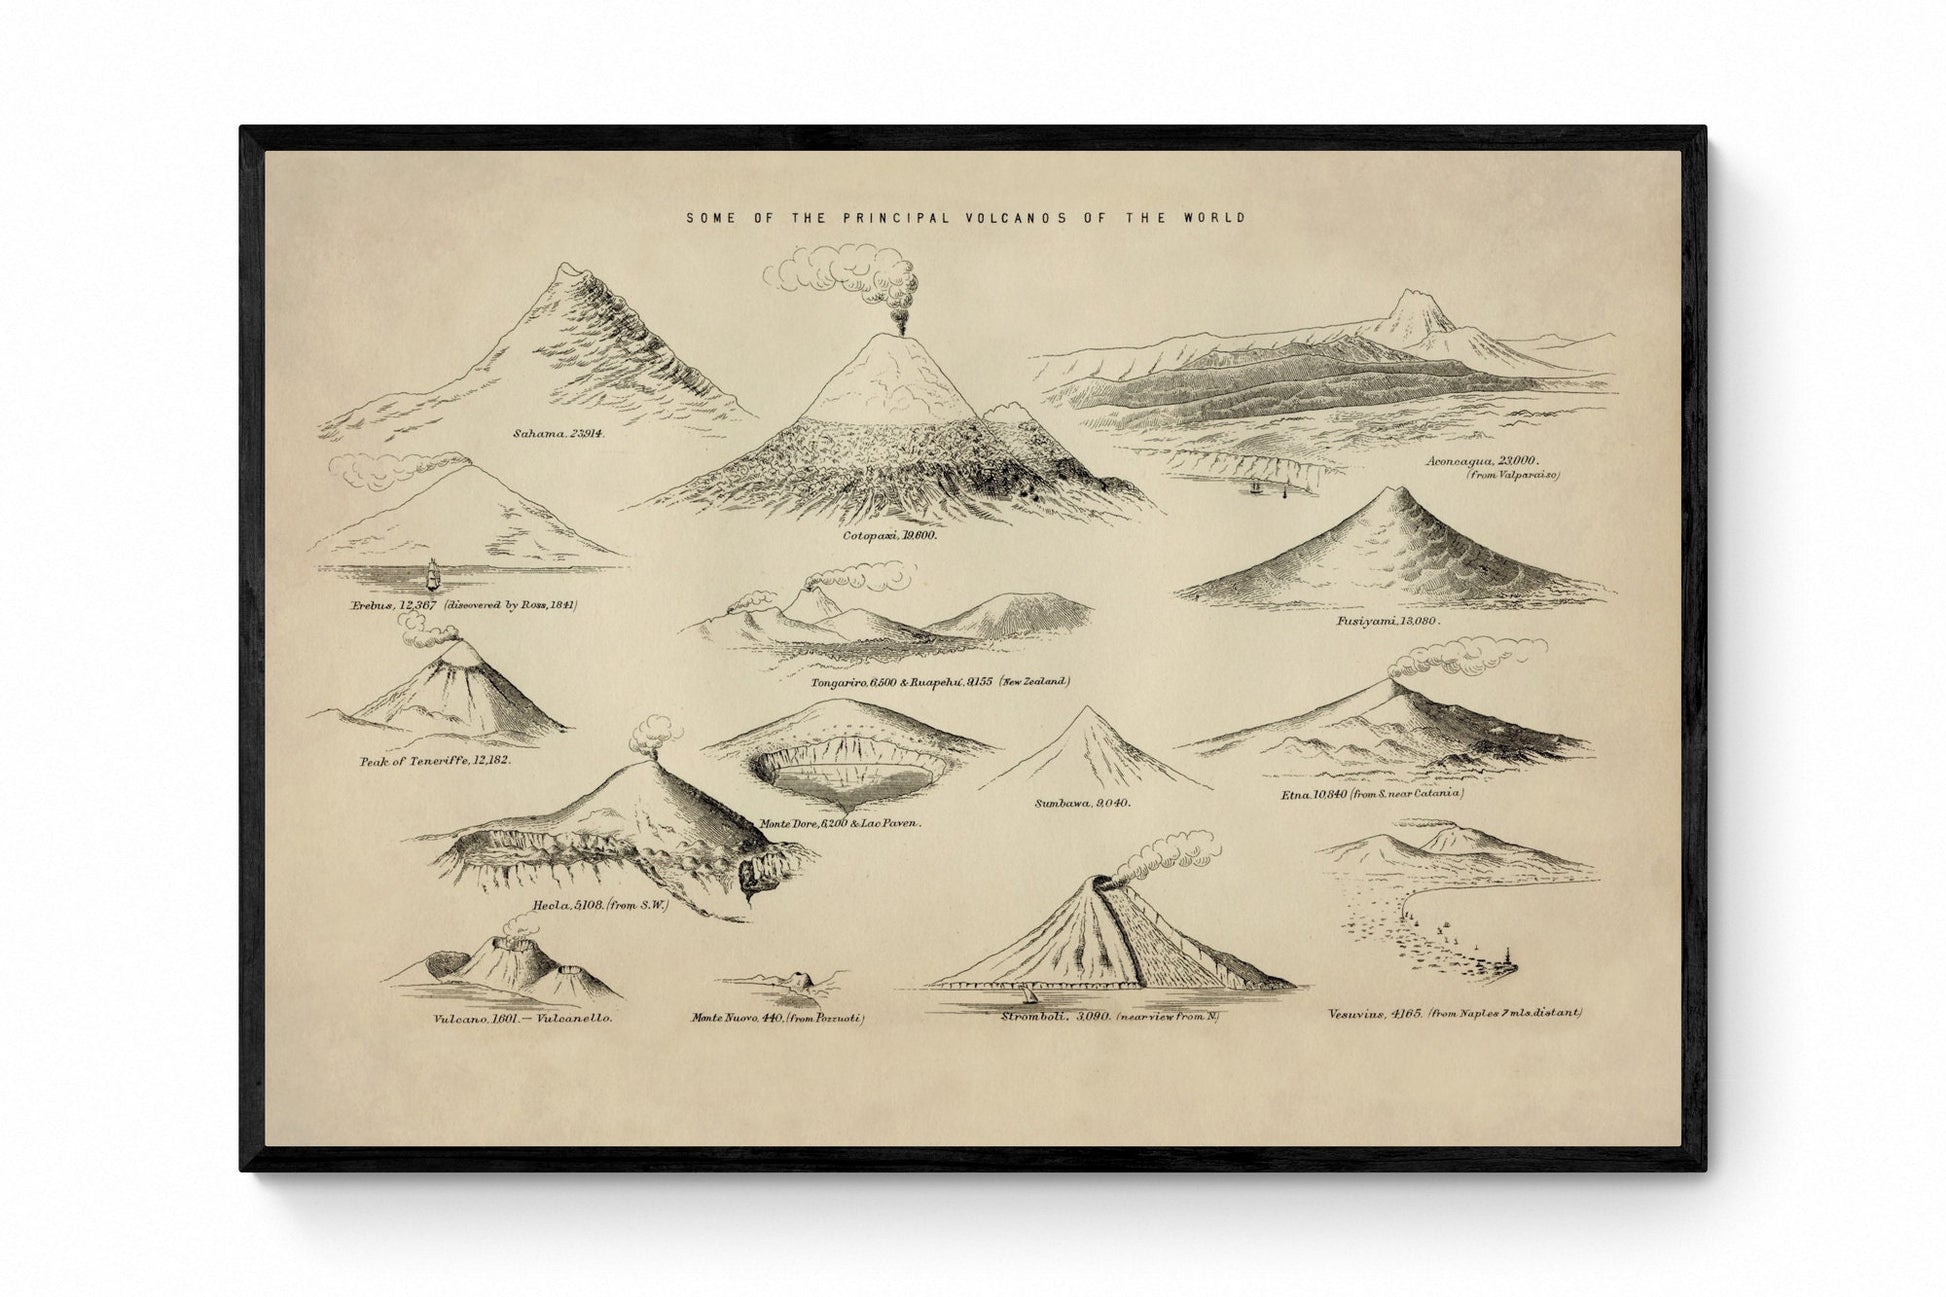 Some of the Principal Volcanoes of the World Antique Reproduction - Volcanology - Geology - Sahama, Erebus, Monte Nuovo - Available Framed